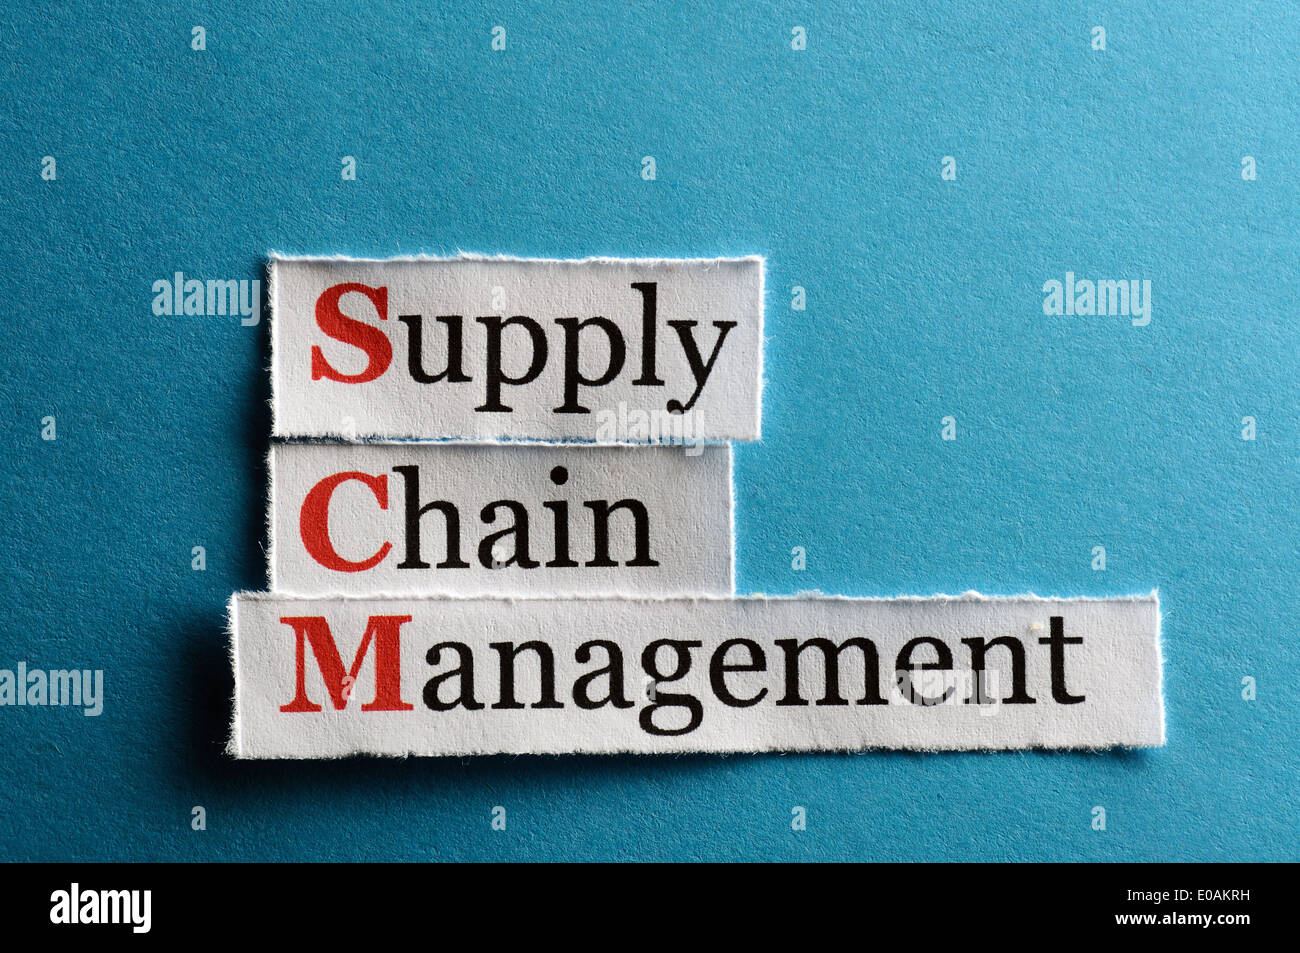 SCM Supply Chain Management acronym on blue paper Stock Photo